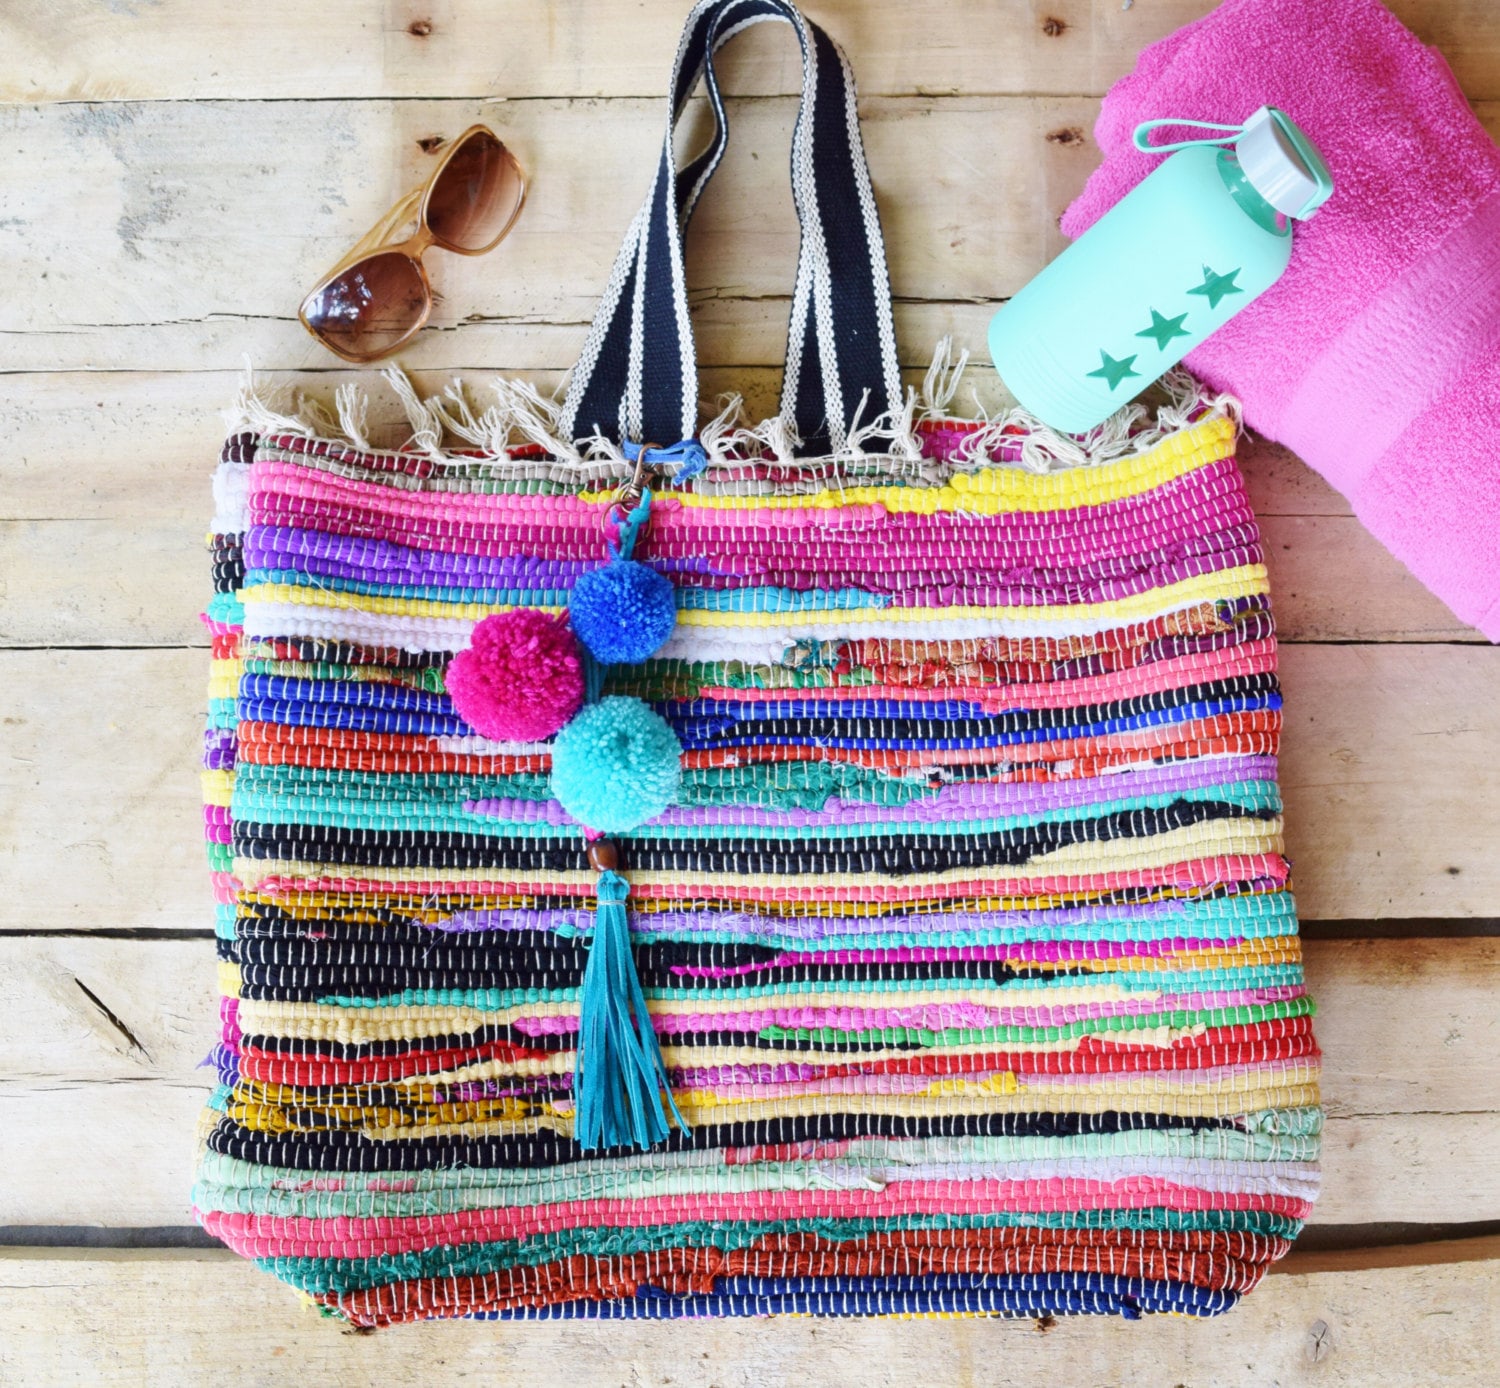 Beach Bag Gift Ideas - What to Put In A Beach Gift Basket For Her